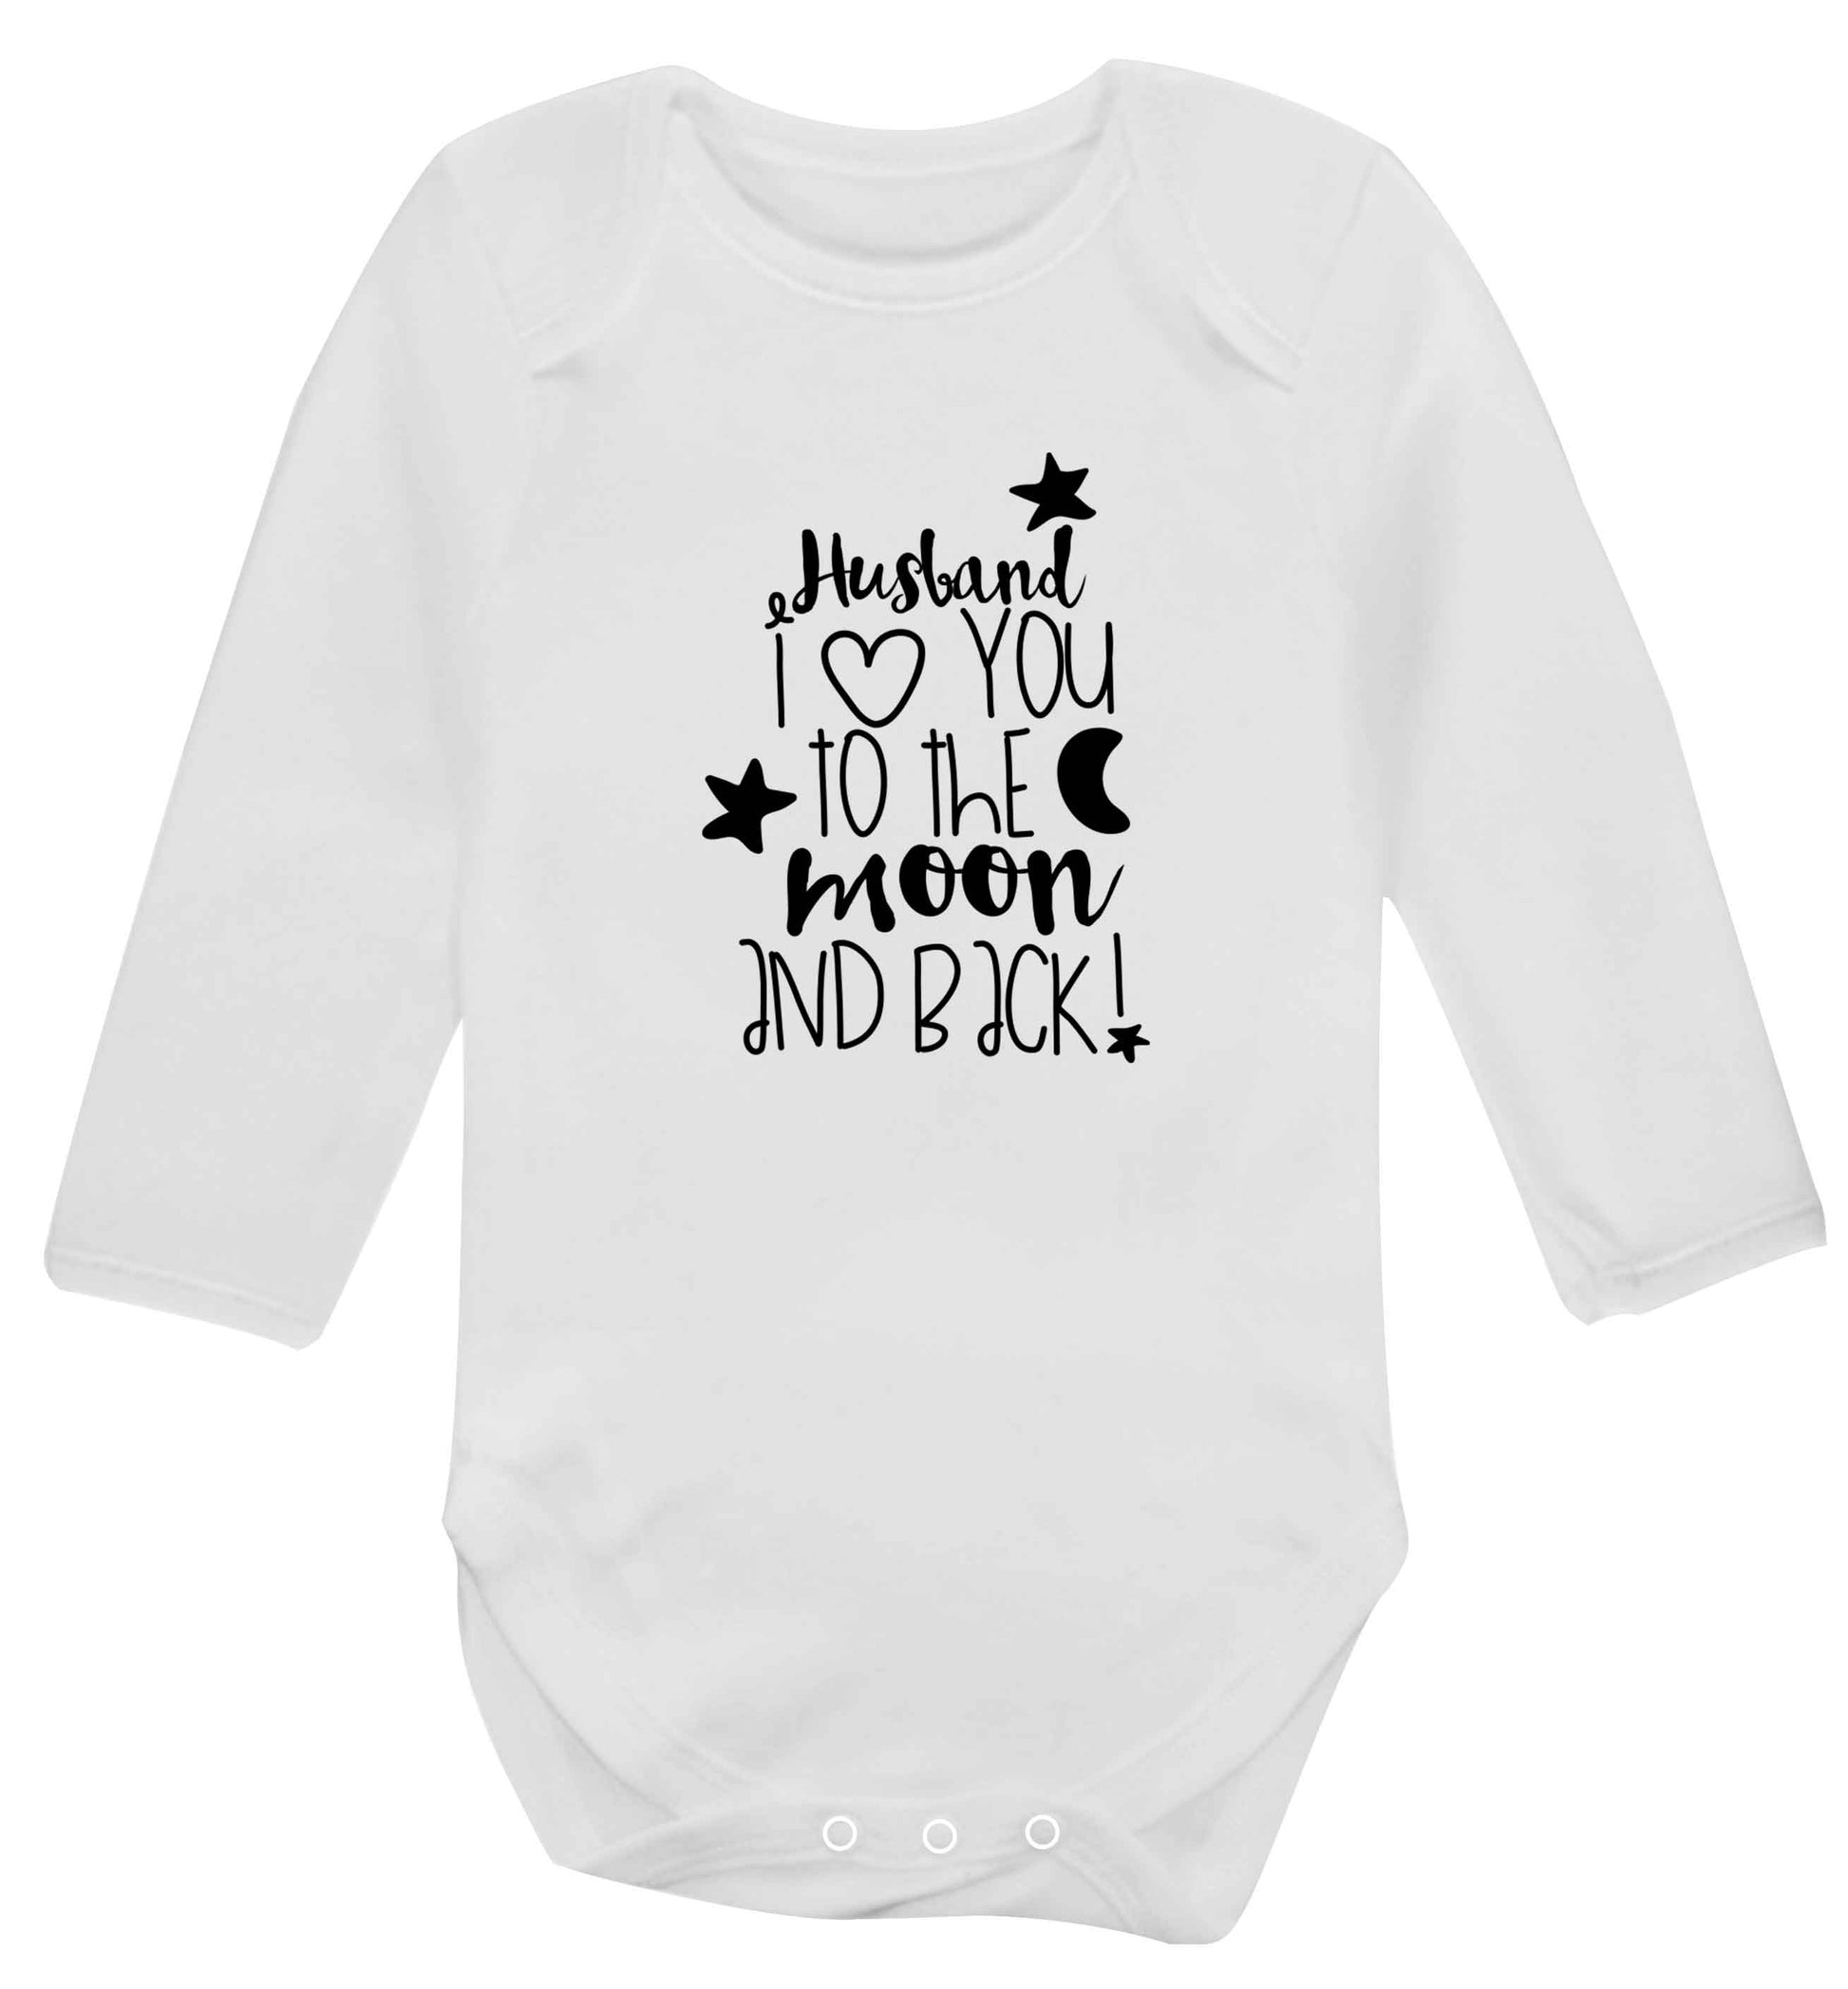 Husband I love you to the moon and back baby vest long sleeved white 6-12 months